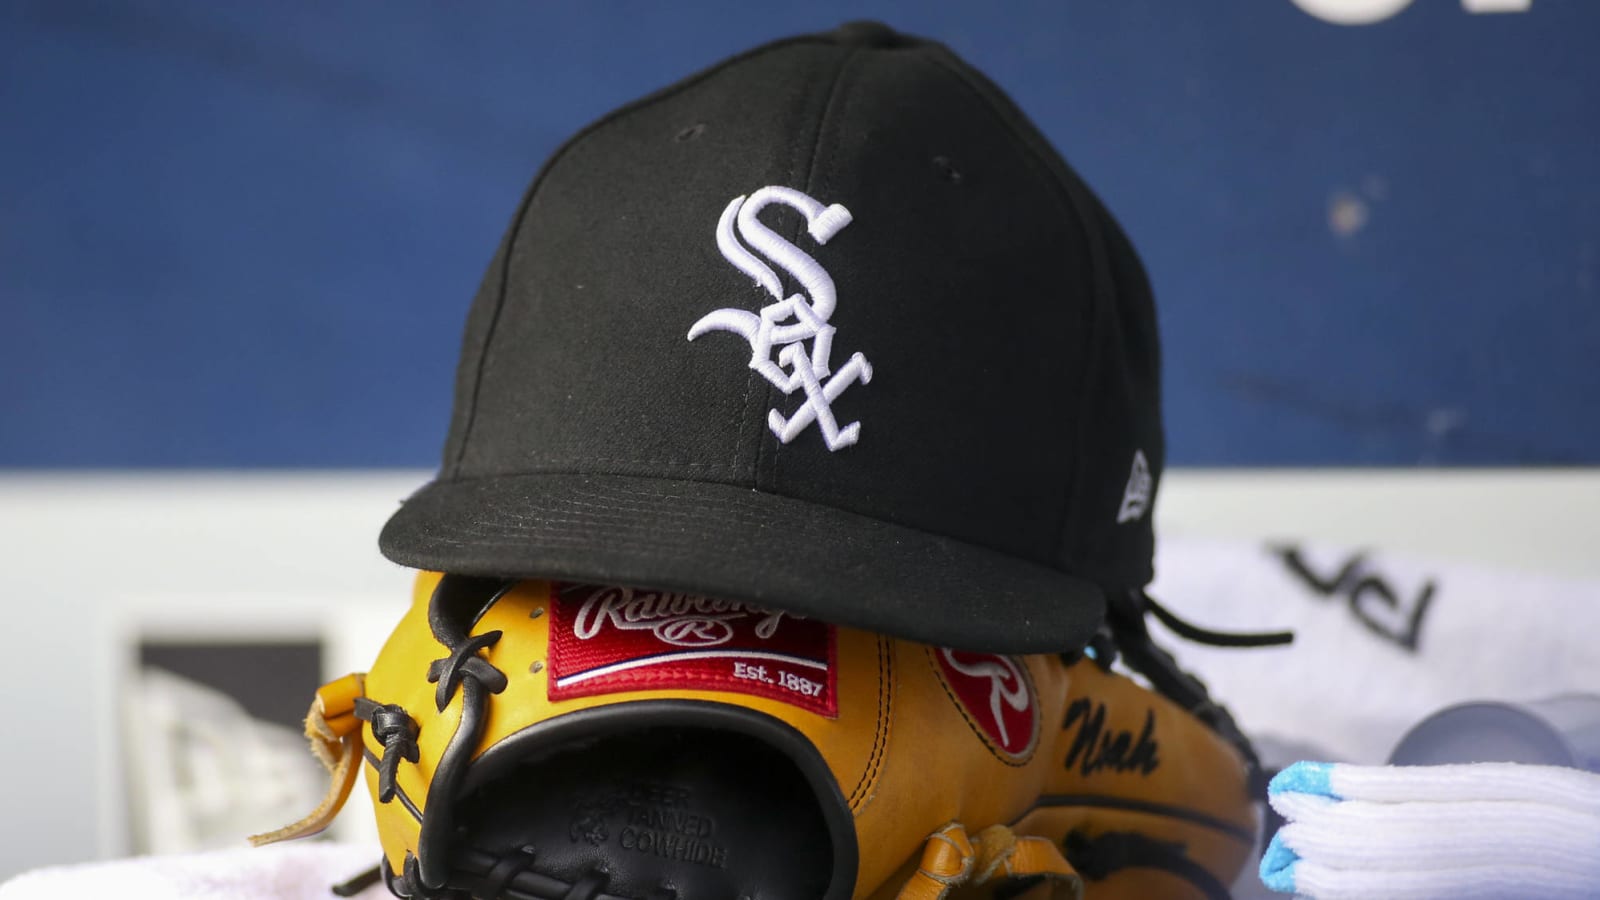 LaMarr Hoyt, 1983 AL Cy Young Award winner with White Sox, dies at